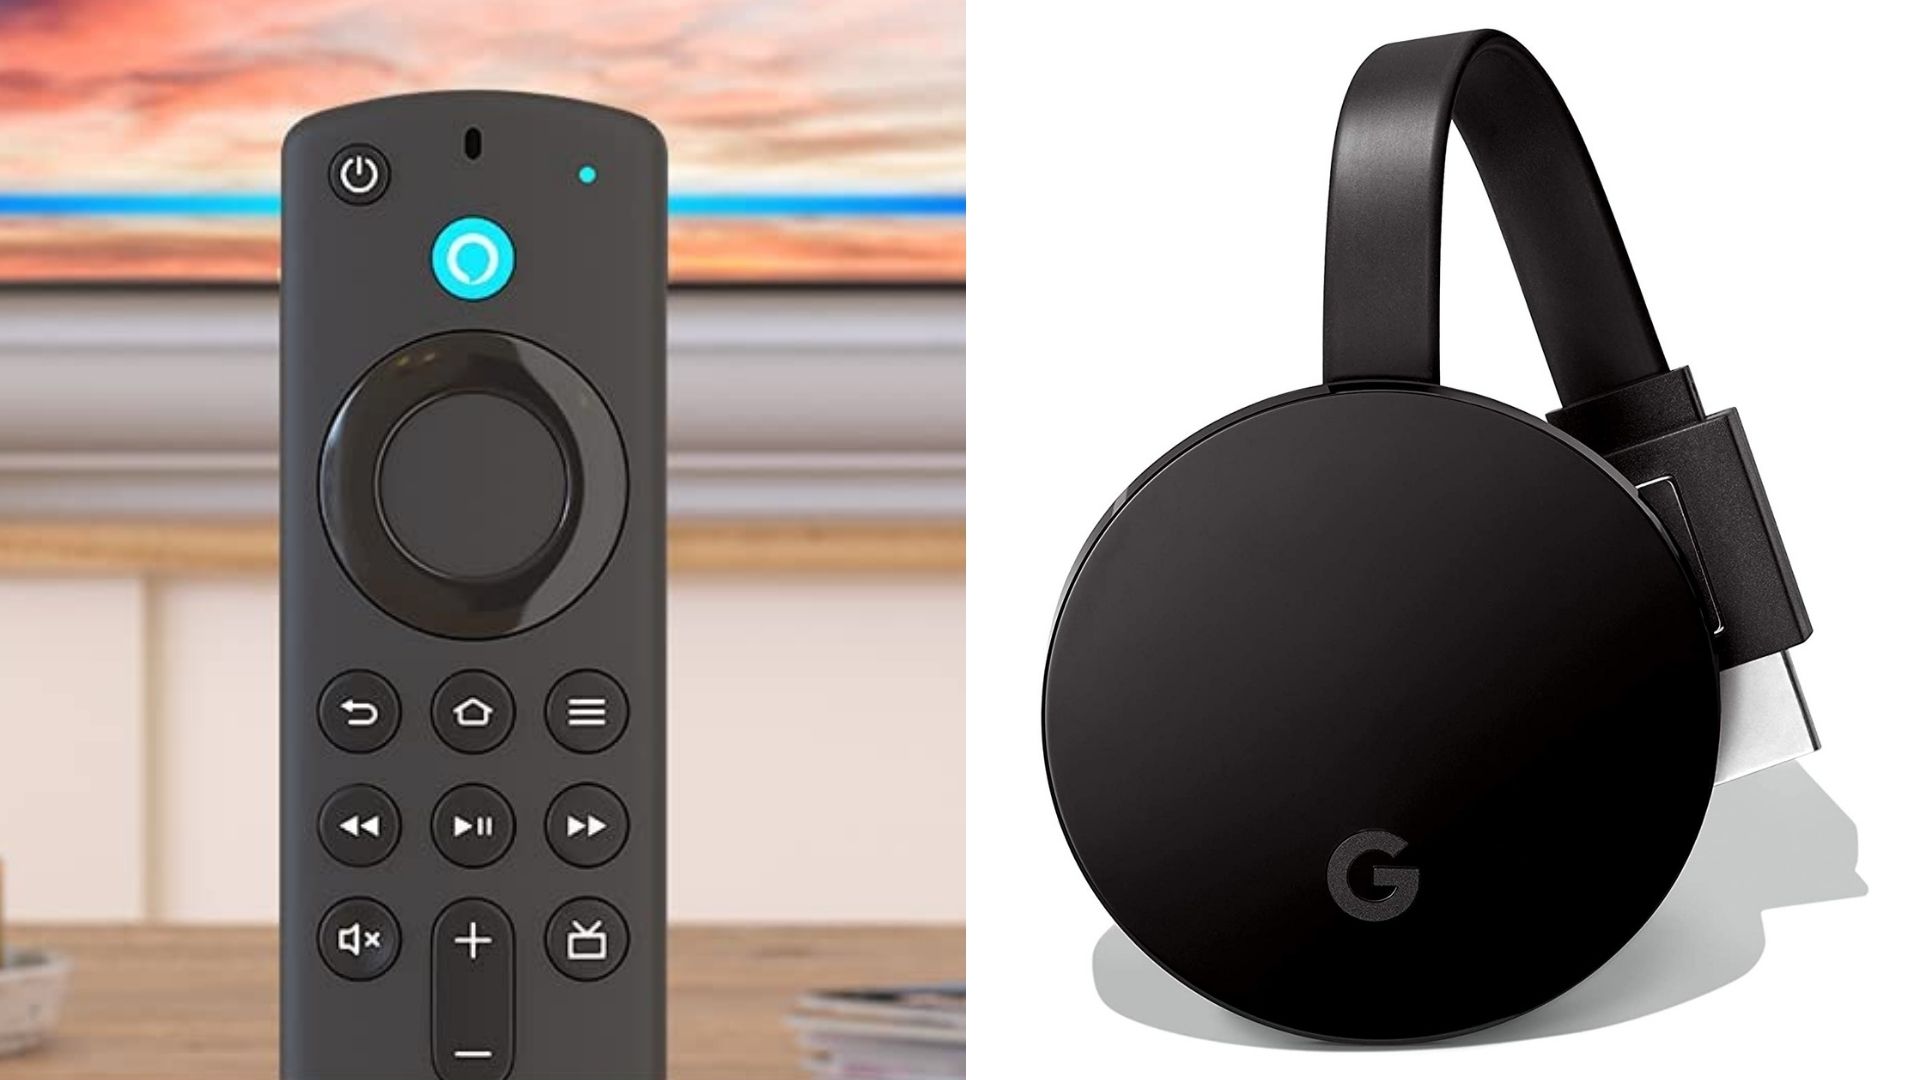 Chromecast faces competition from Firefox OS streaming stick - Gear